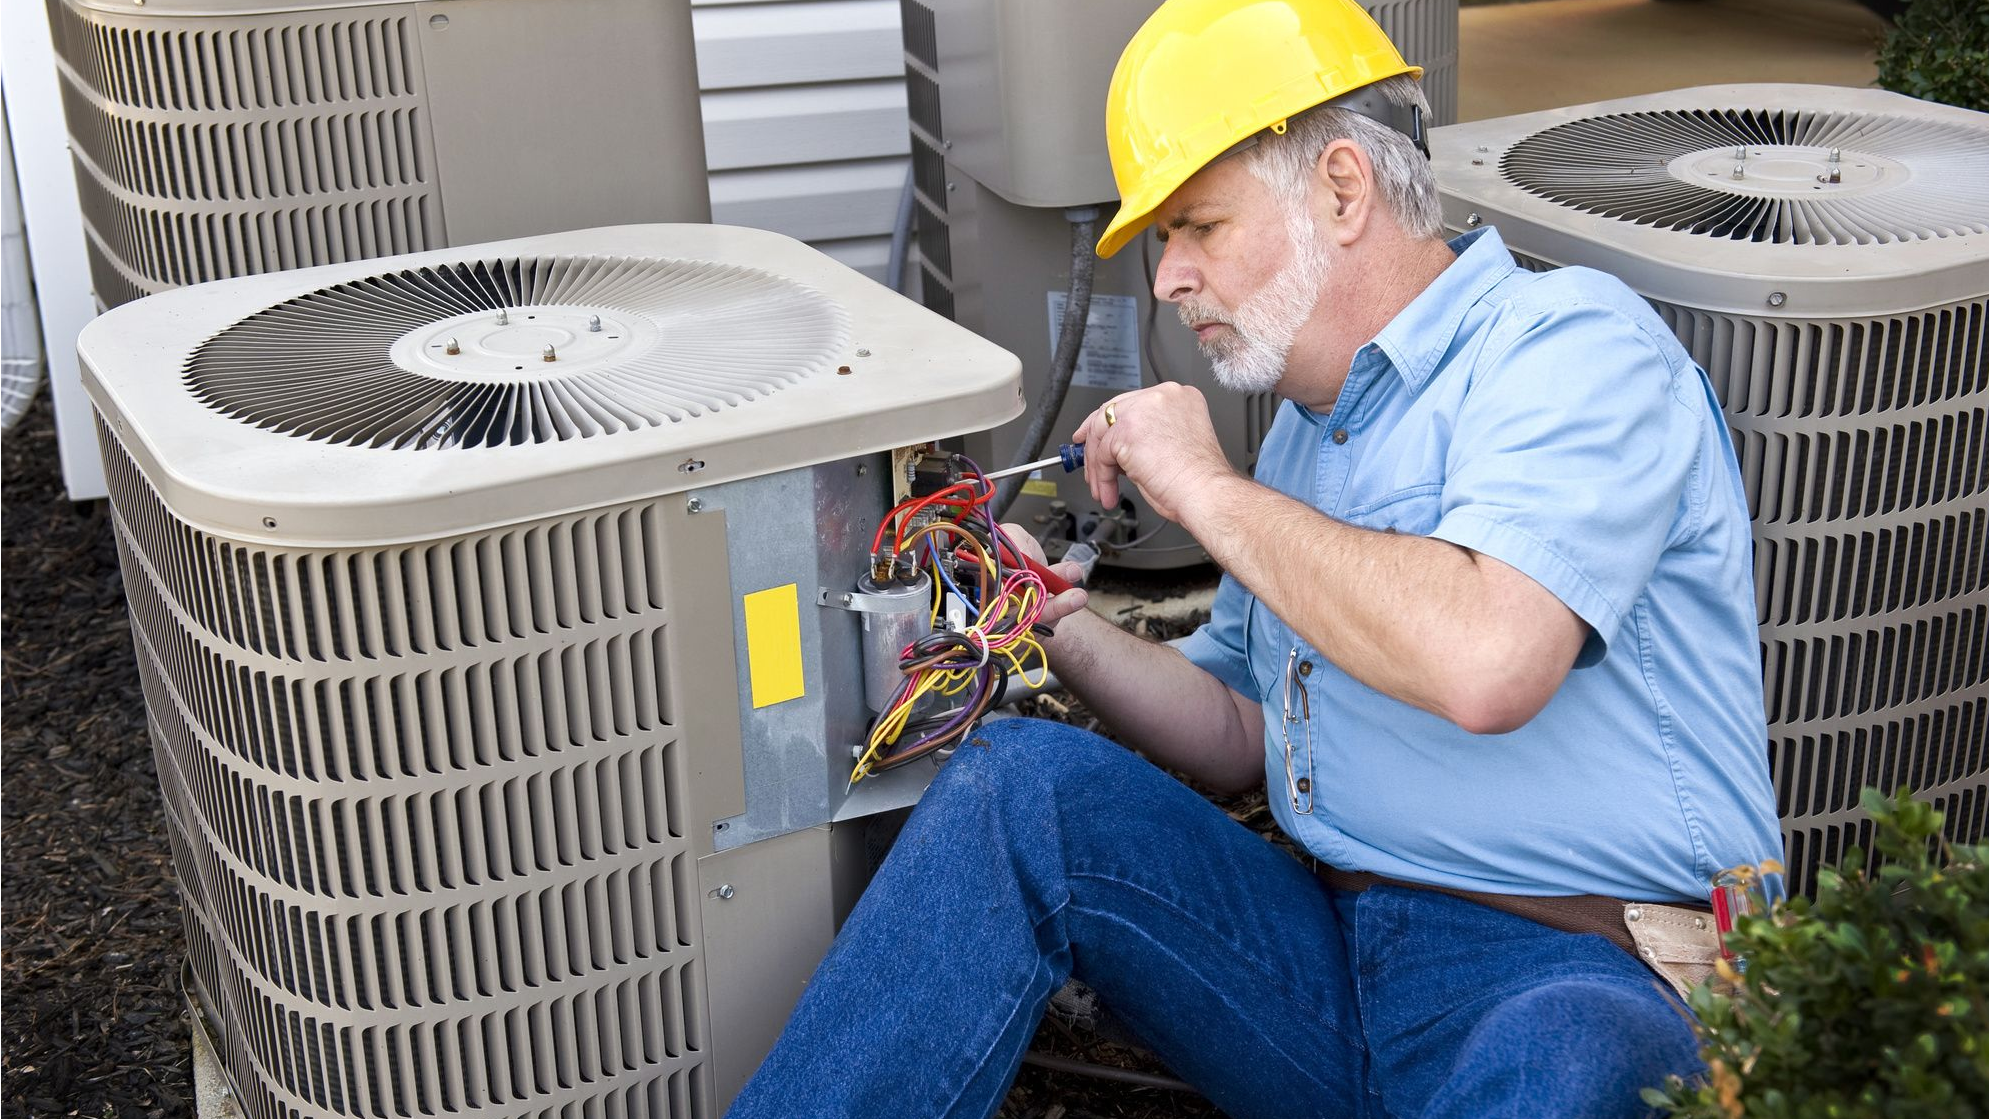 Schedule a Spring Air Conditioning Tune-Up: Call Biloxi's Best HVAC Contractor